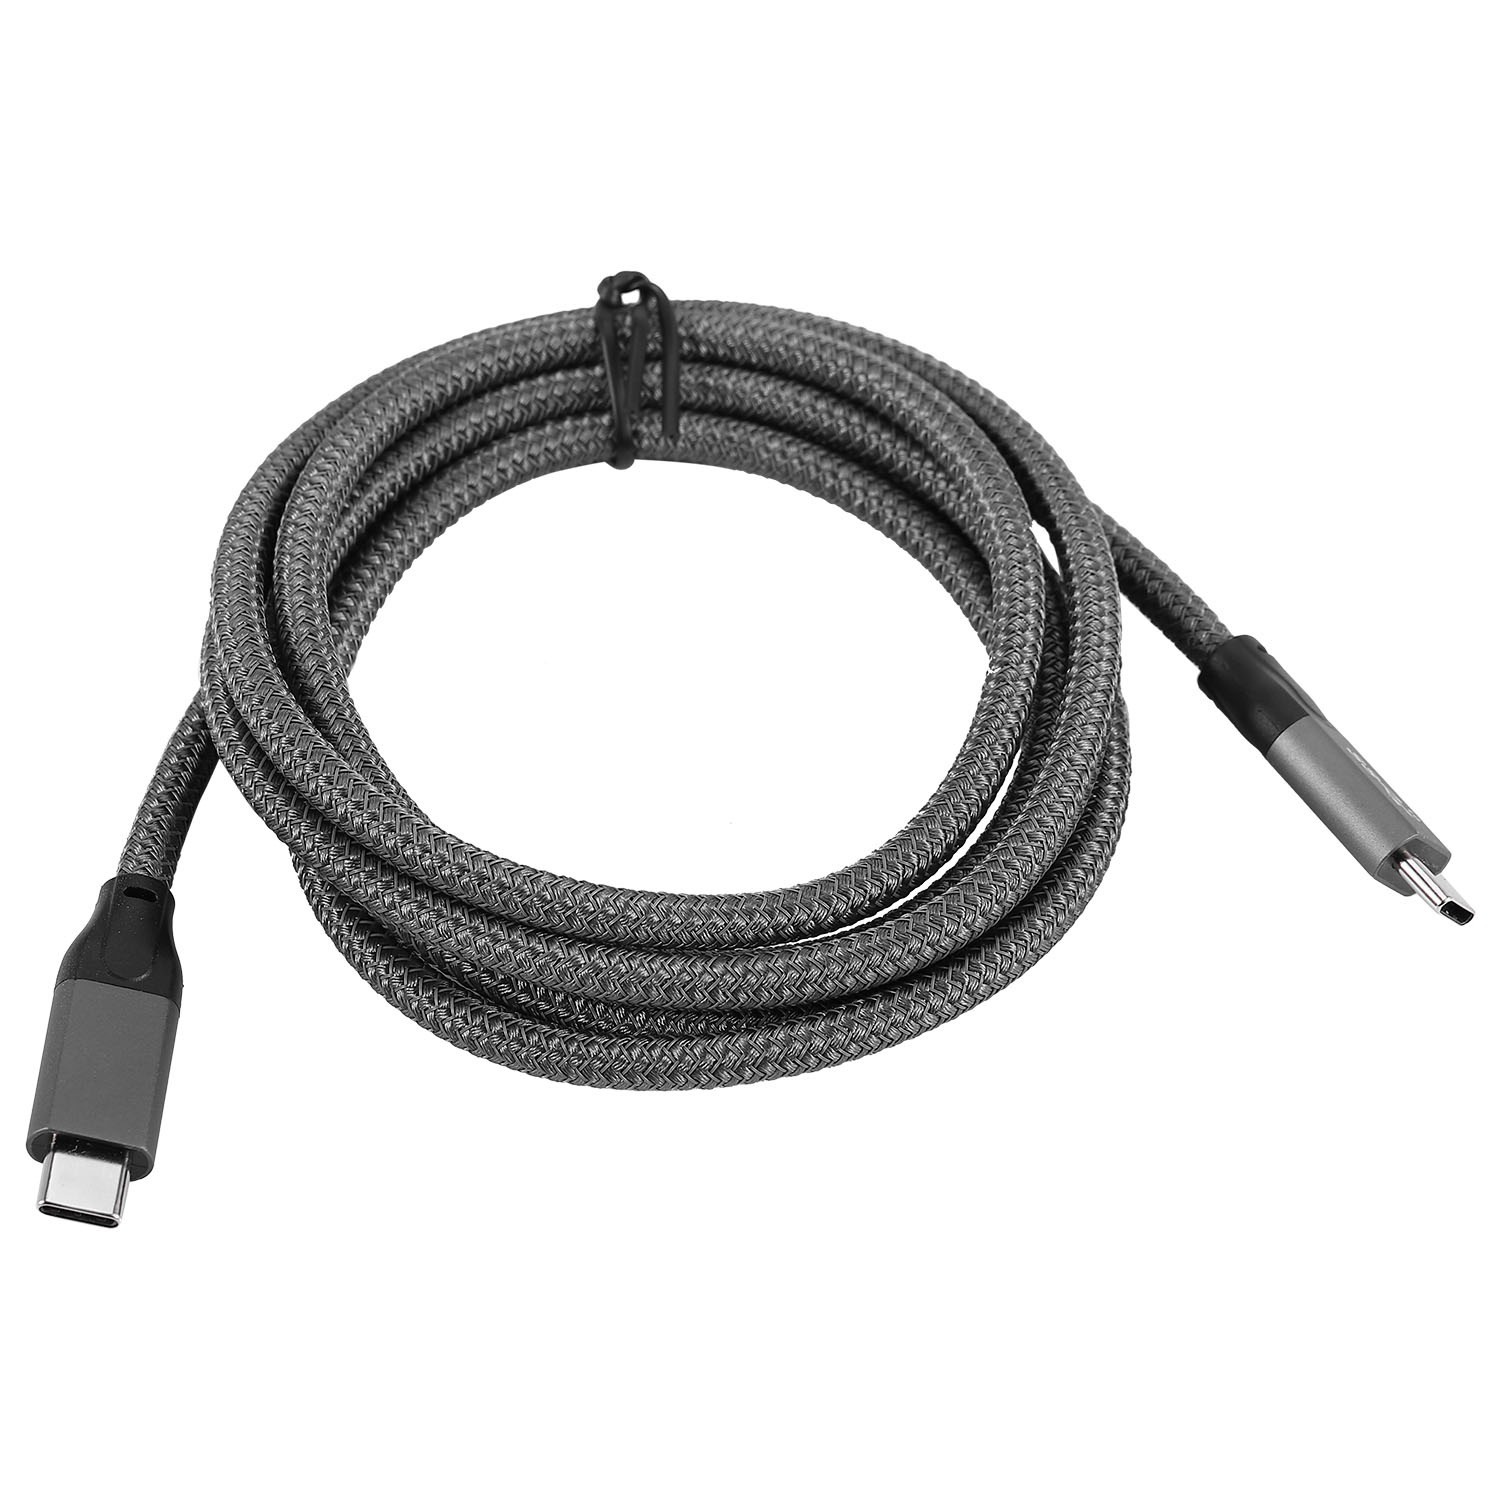 10Gbps USB-C USB 3.1 Type C Gen2 Male To Male Data Cable 1 Meter | BigBuy360 - bigbuy360.vn